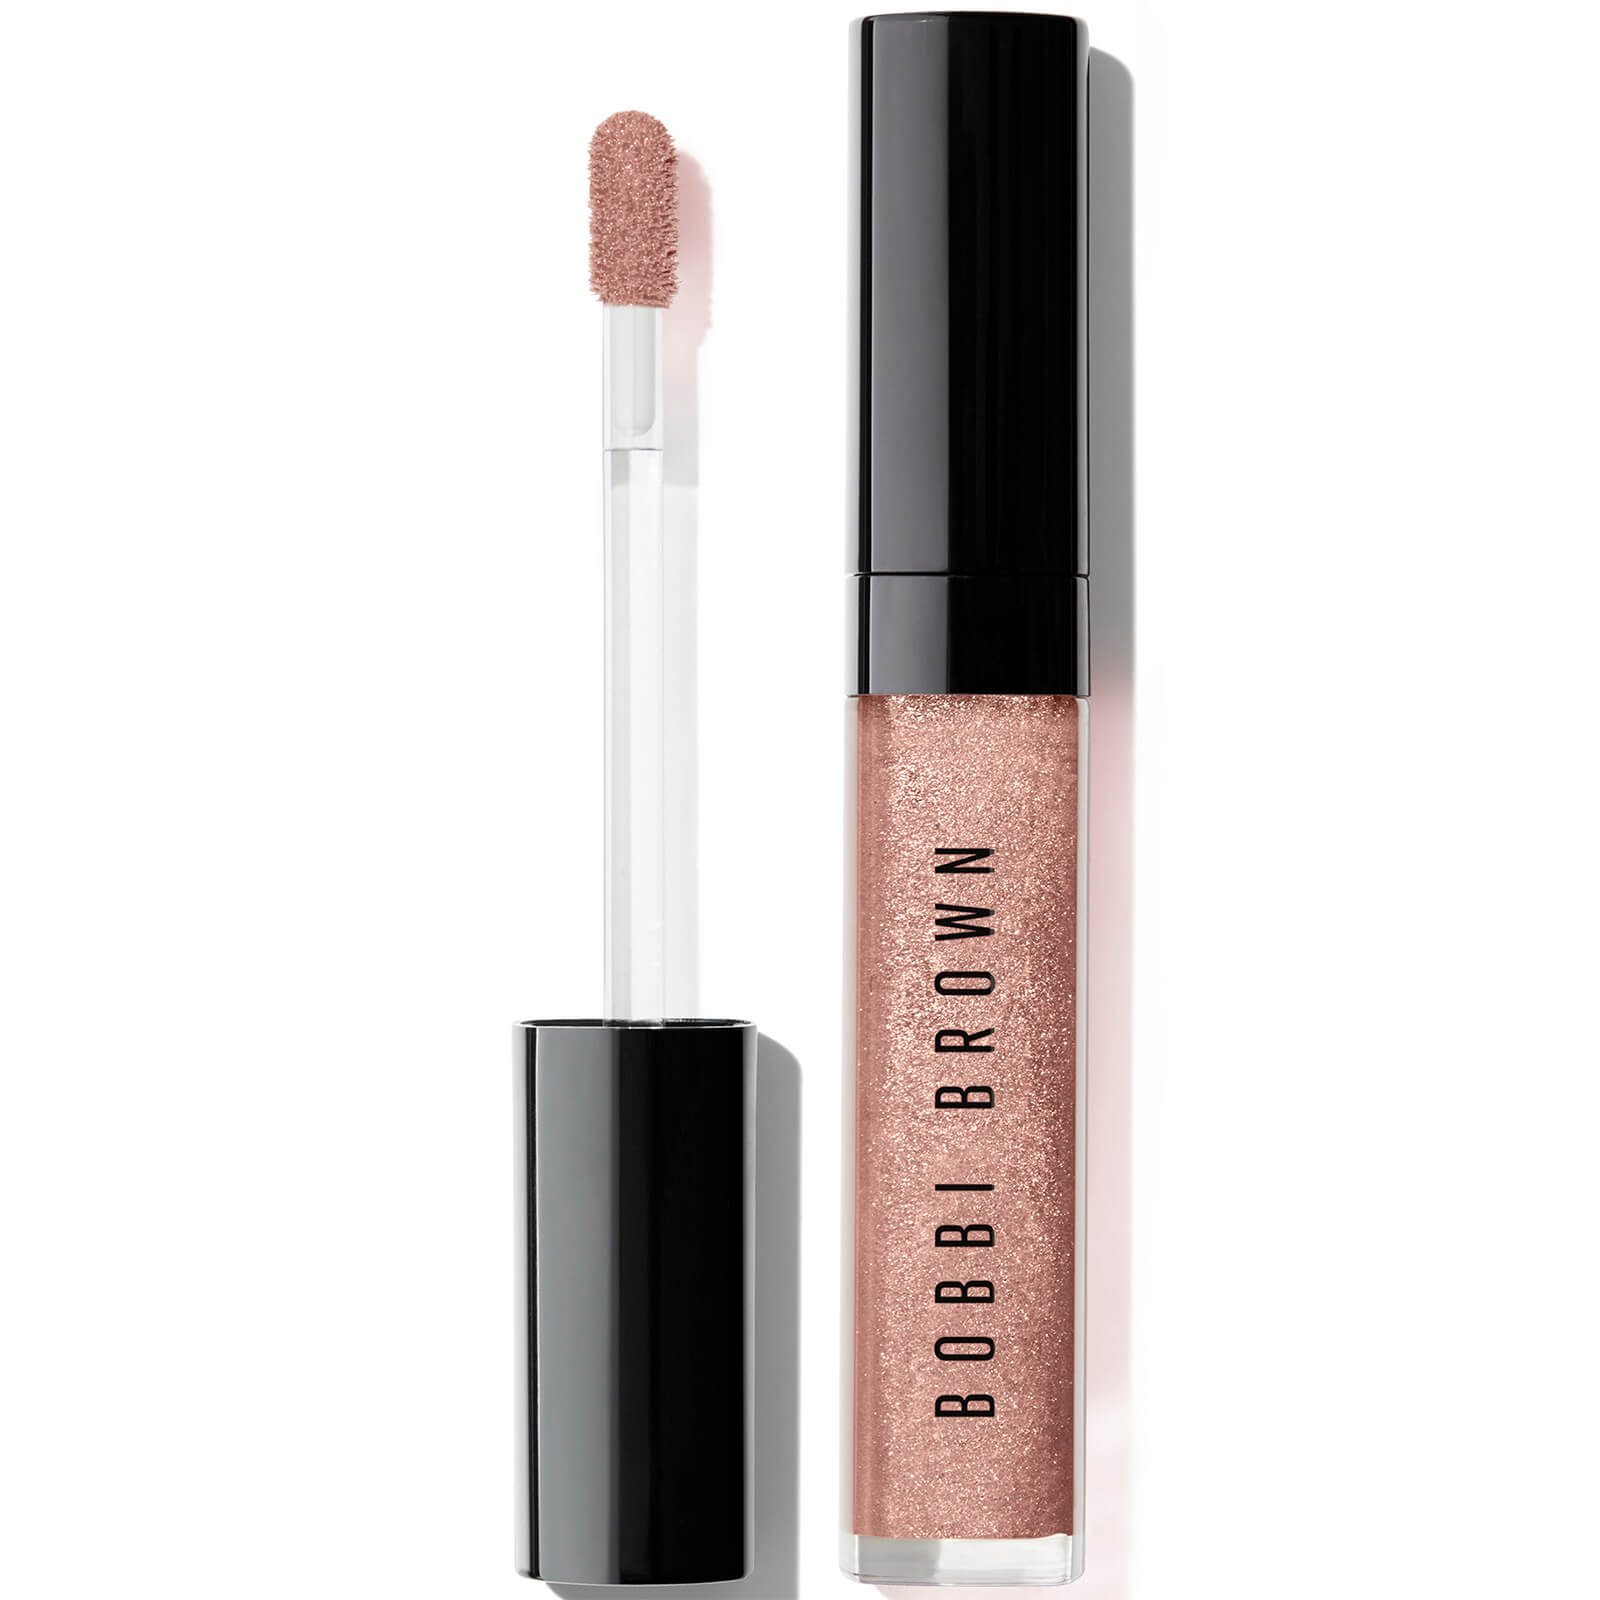 Bobbi Brown Crushed Oil Infused Gloss Shimmer 10g (Various Shades) - Bare Sparkle